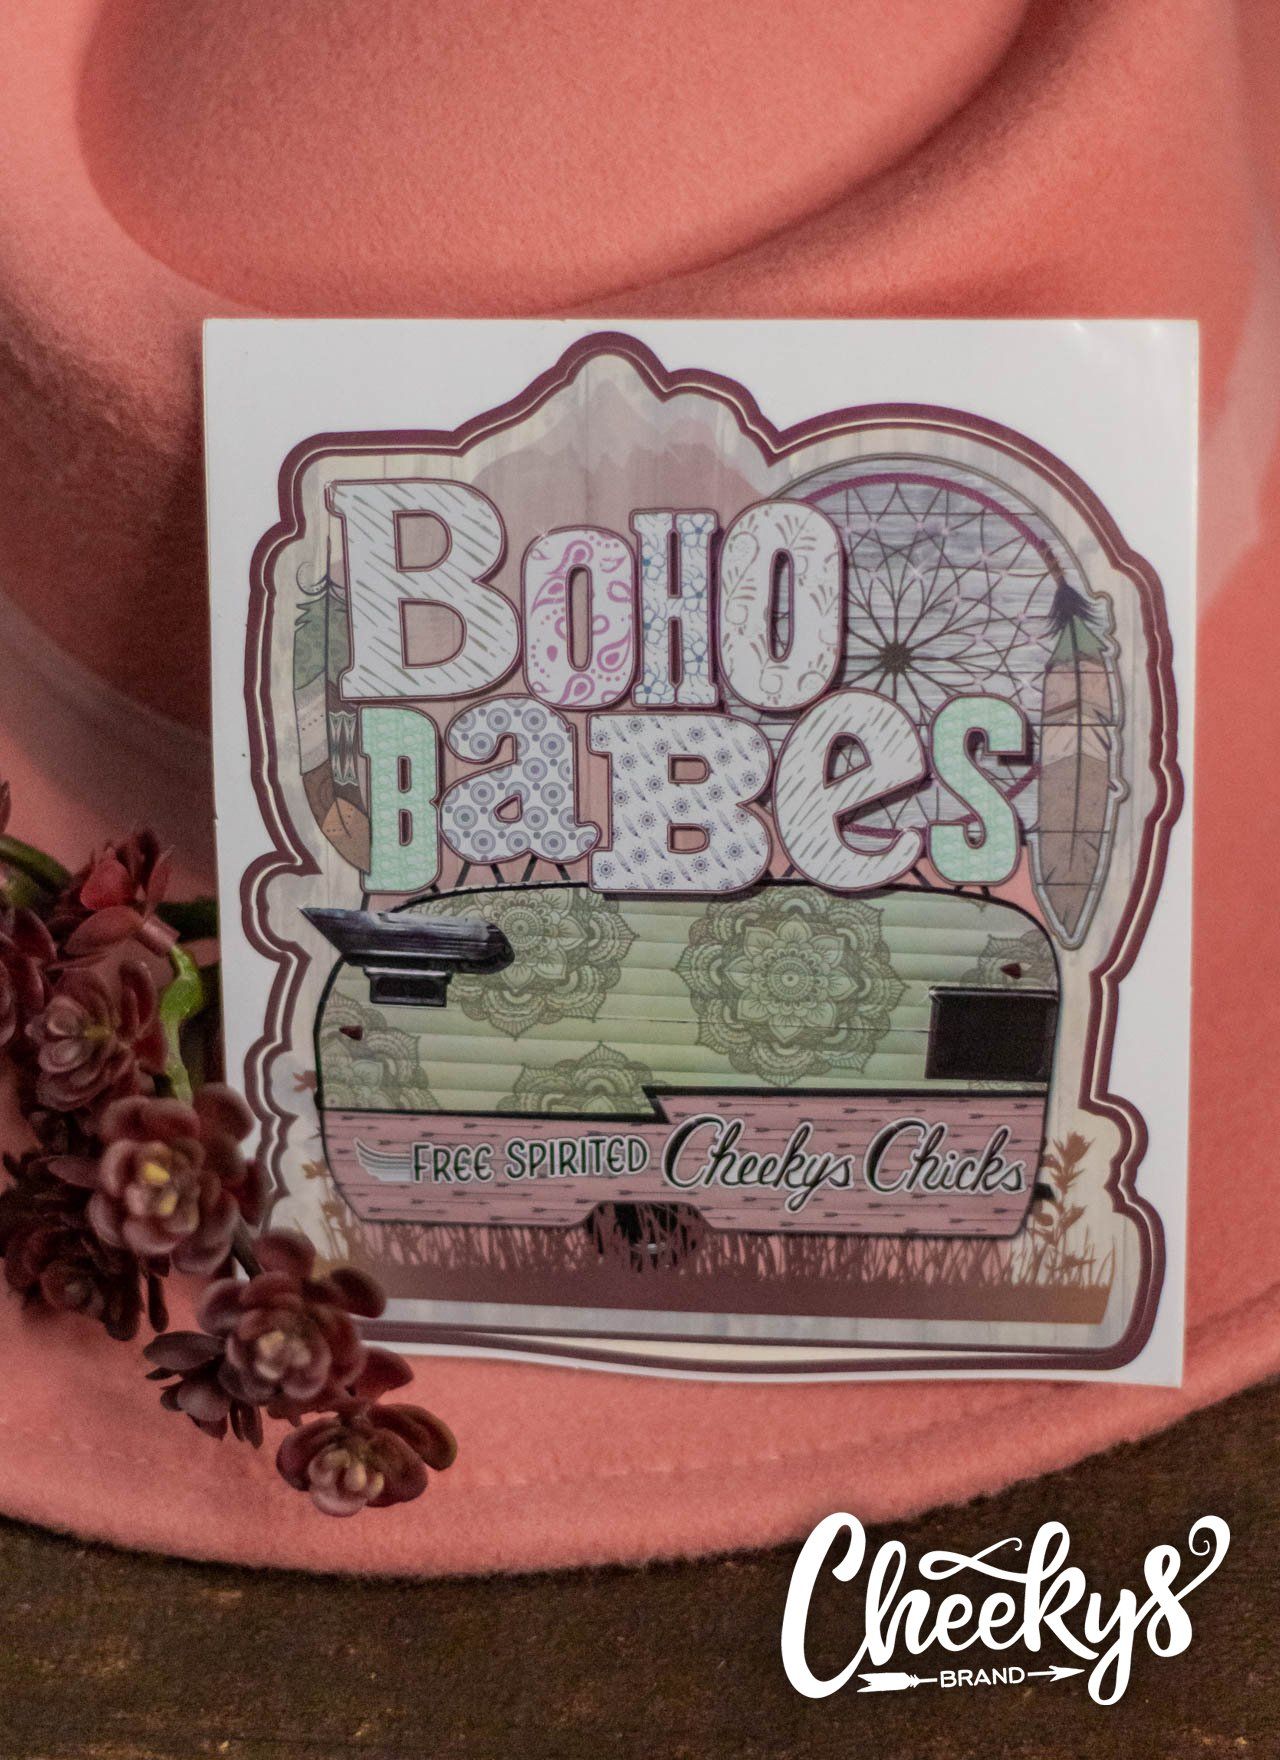 BoHo Babes Decal Accessories 46 